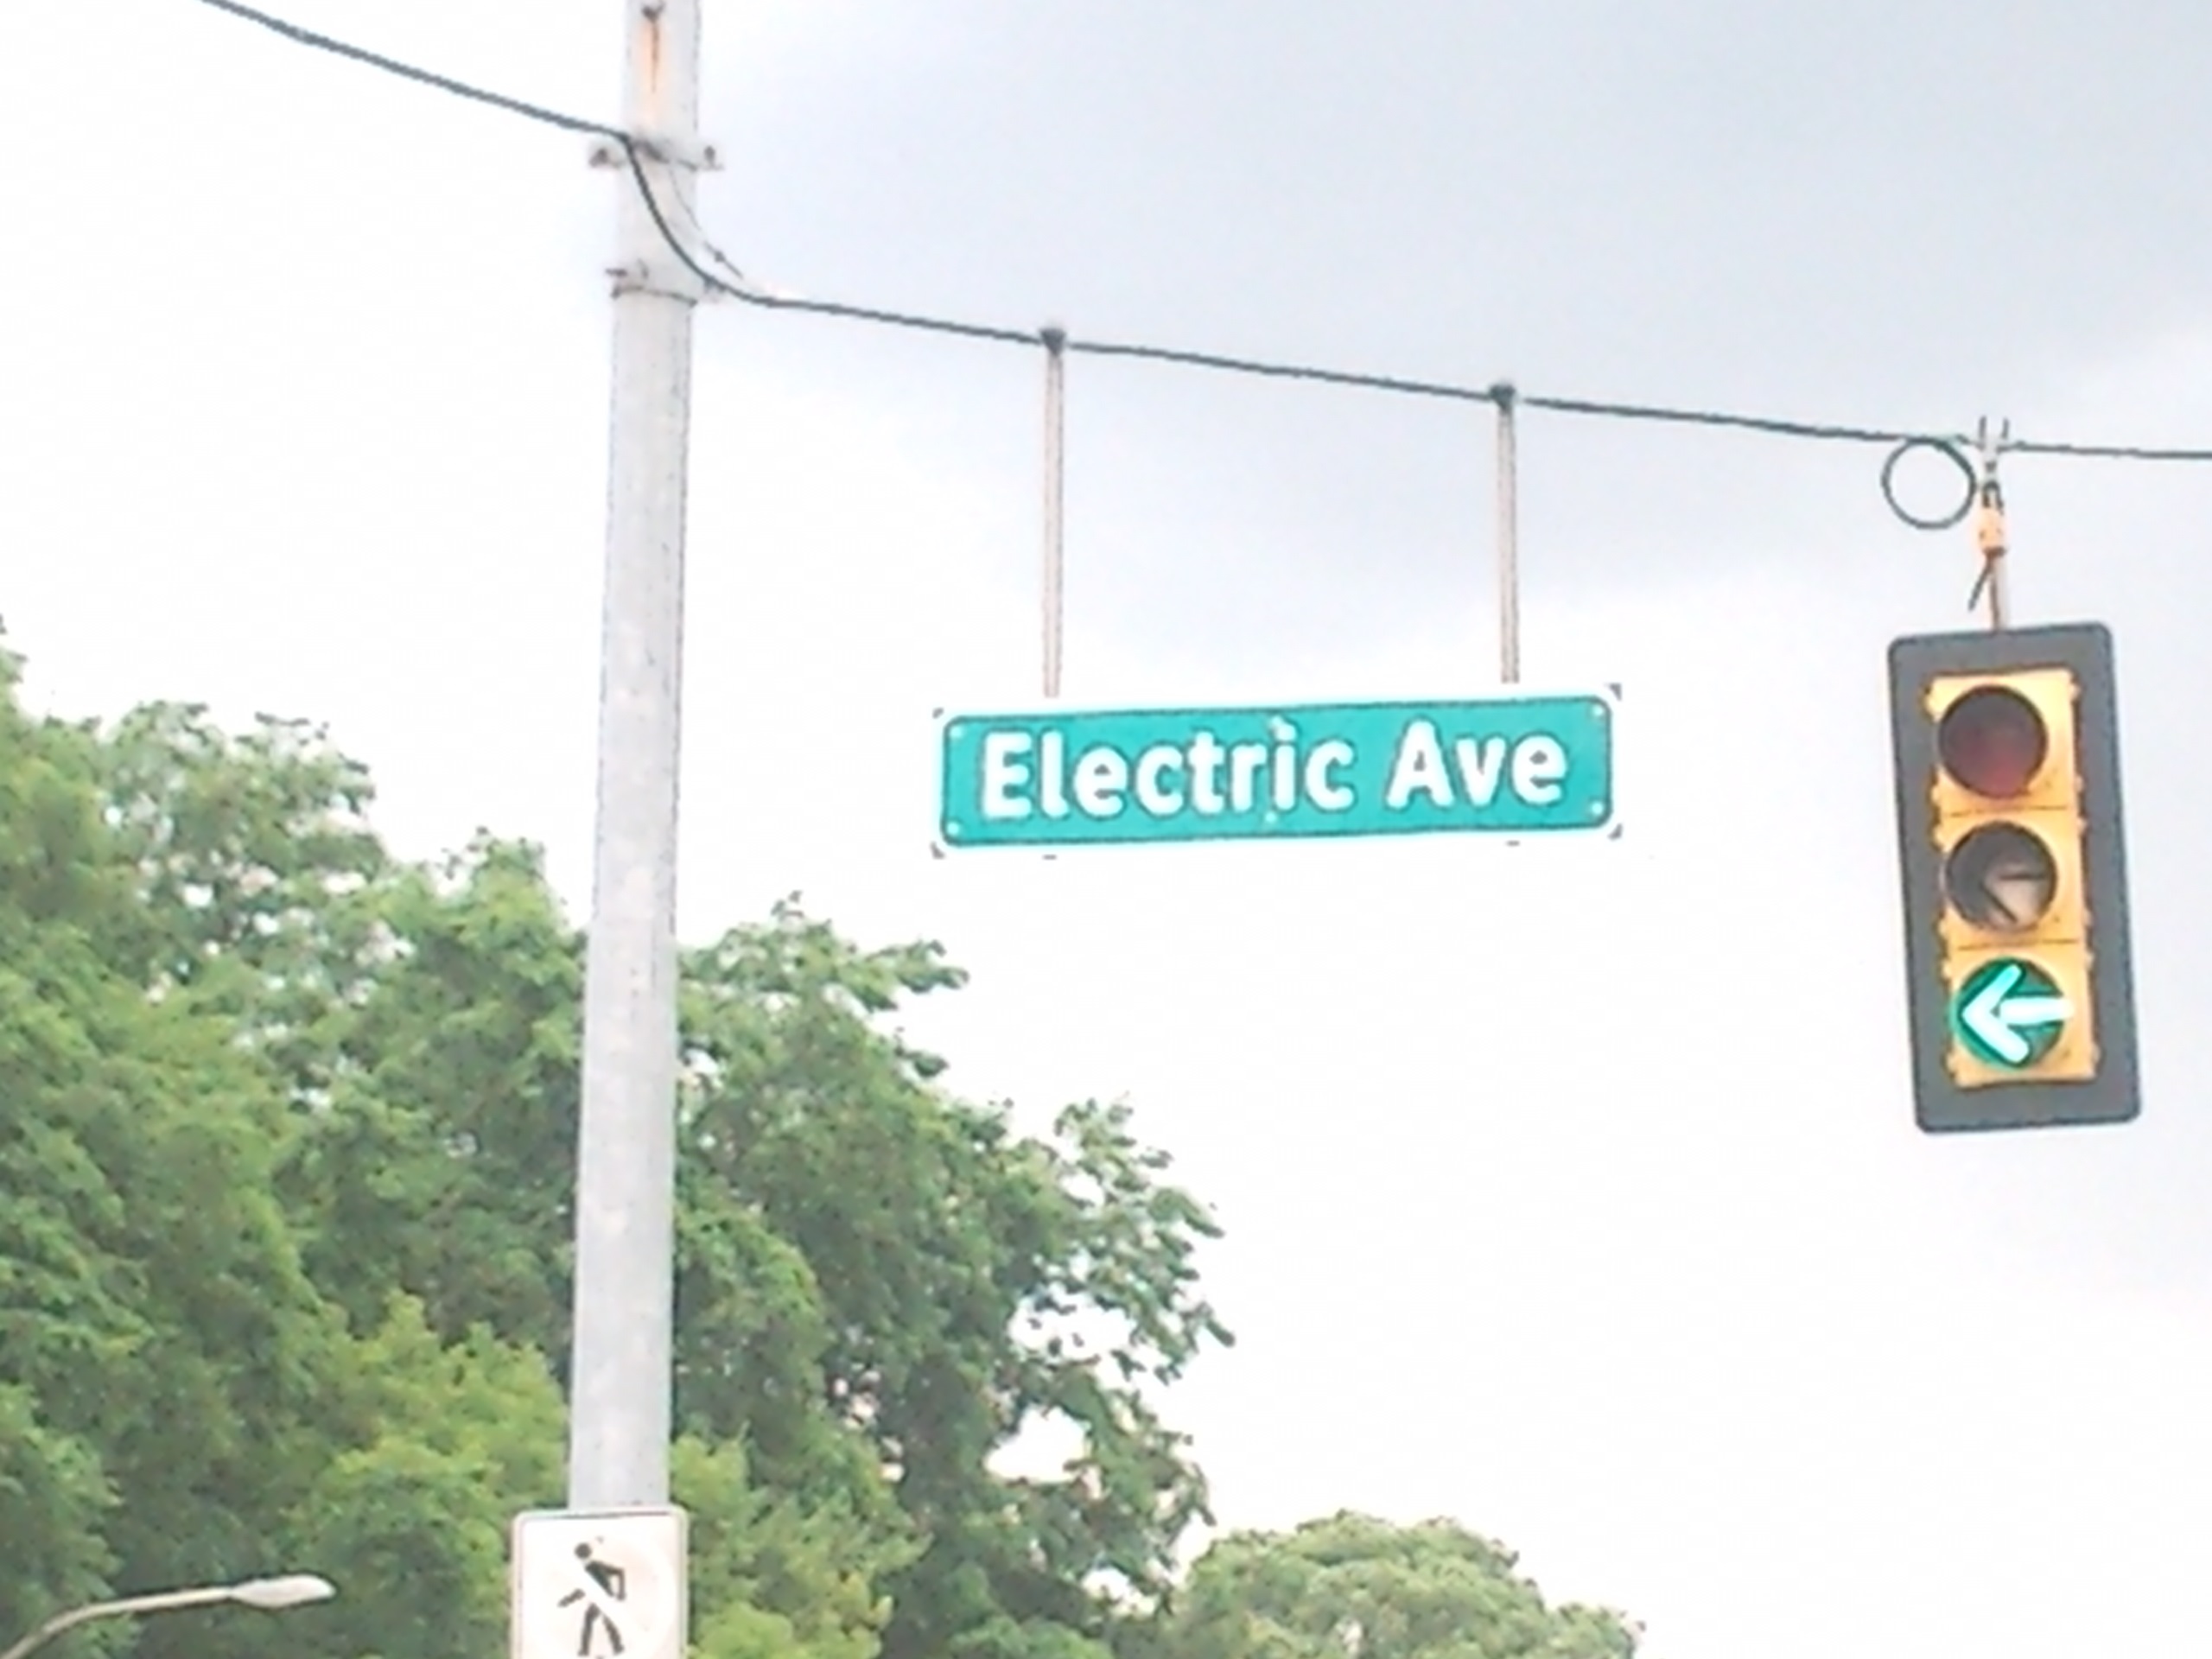 I want to Rock on to Electric Avenue .. the electric avenue Eddie Grant sang about is the Electric Avenue I want to rock on down to ...because this part of East Pittsburgh is a real Sh#thoL3 ...      and then we'll take it high-a !